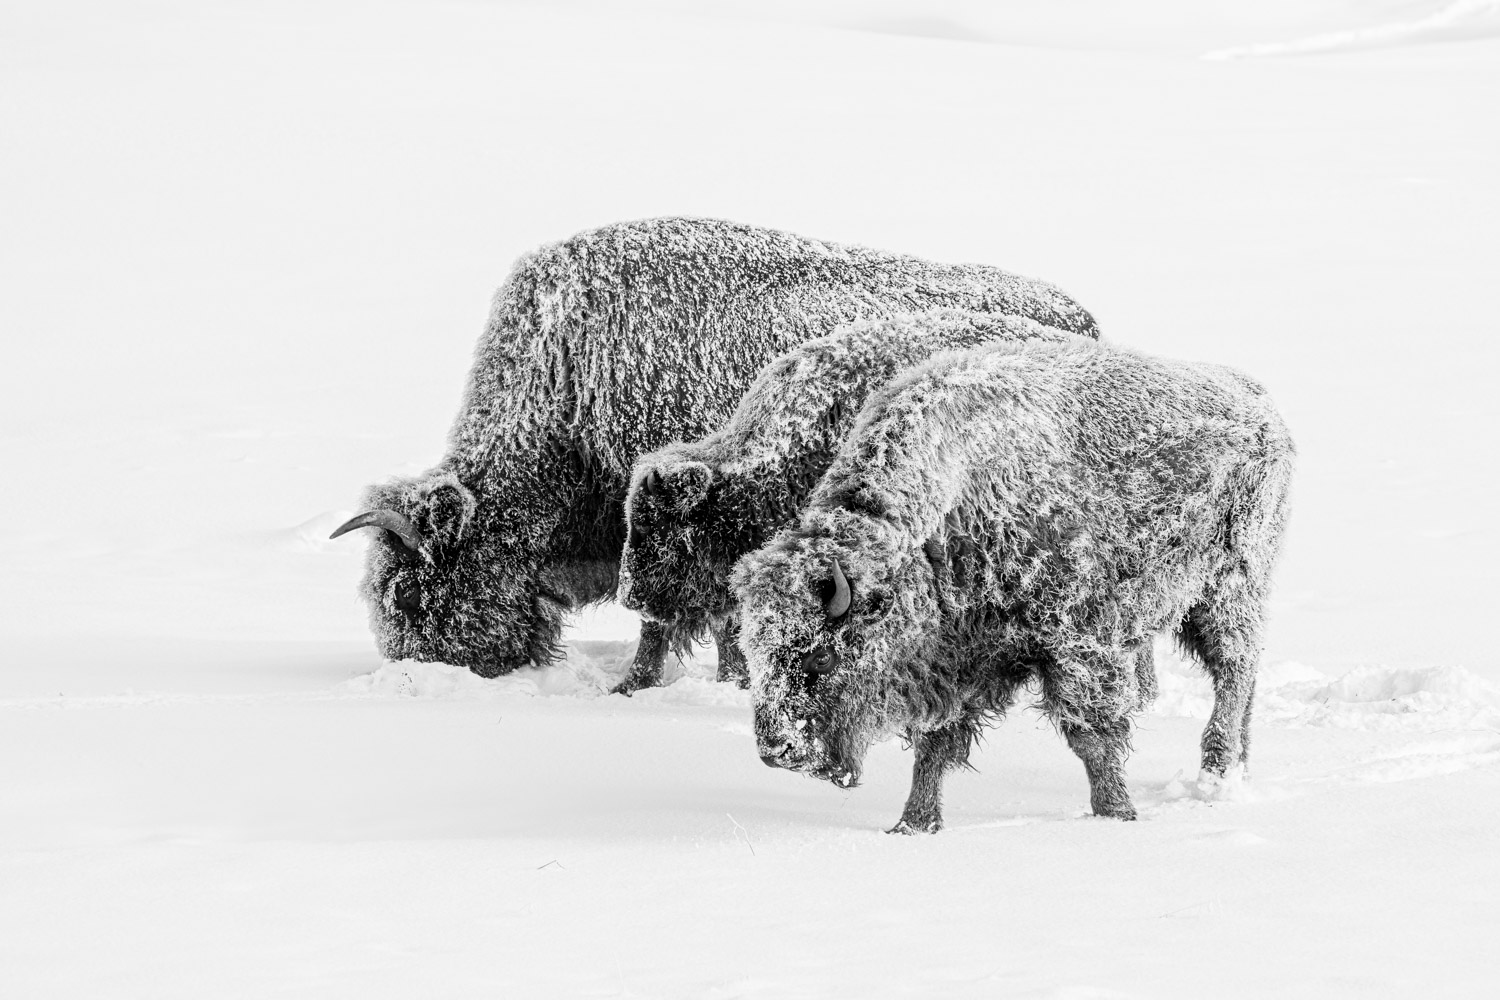 three bison covered in snow looking for food